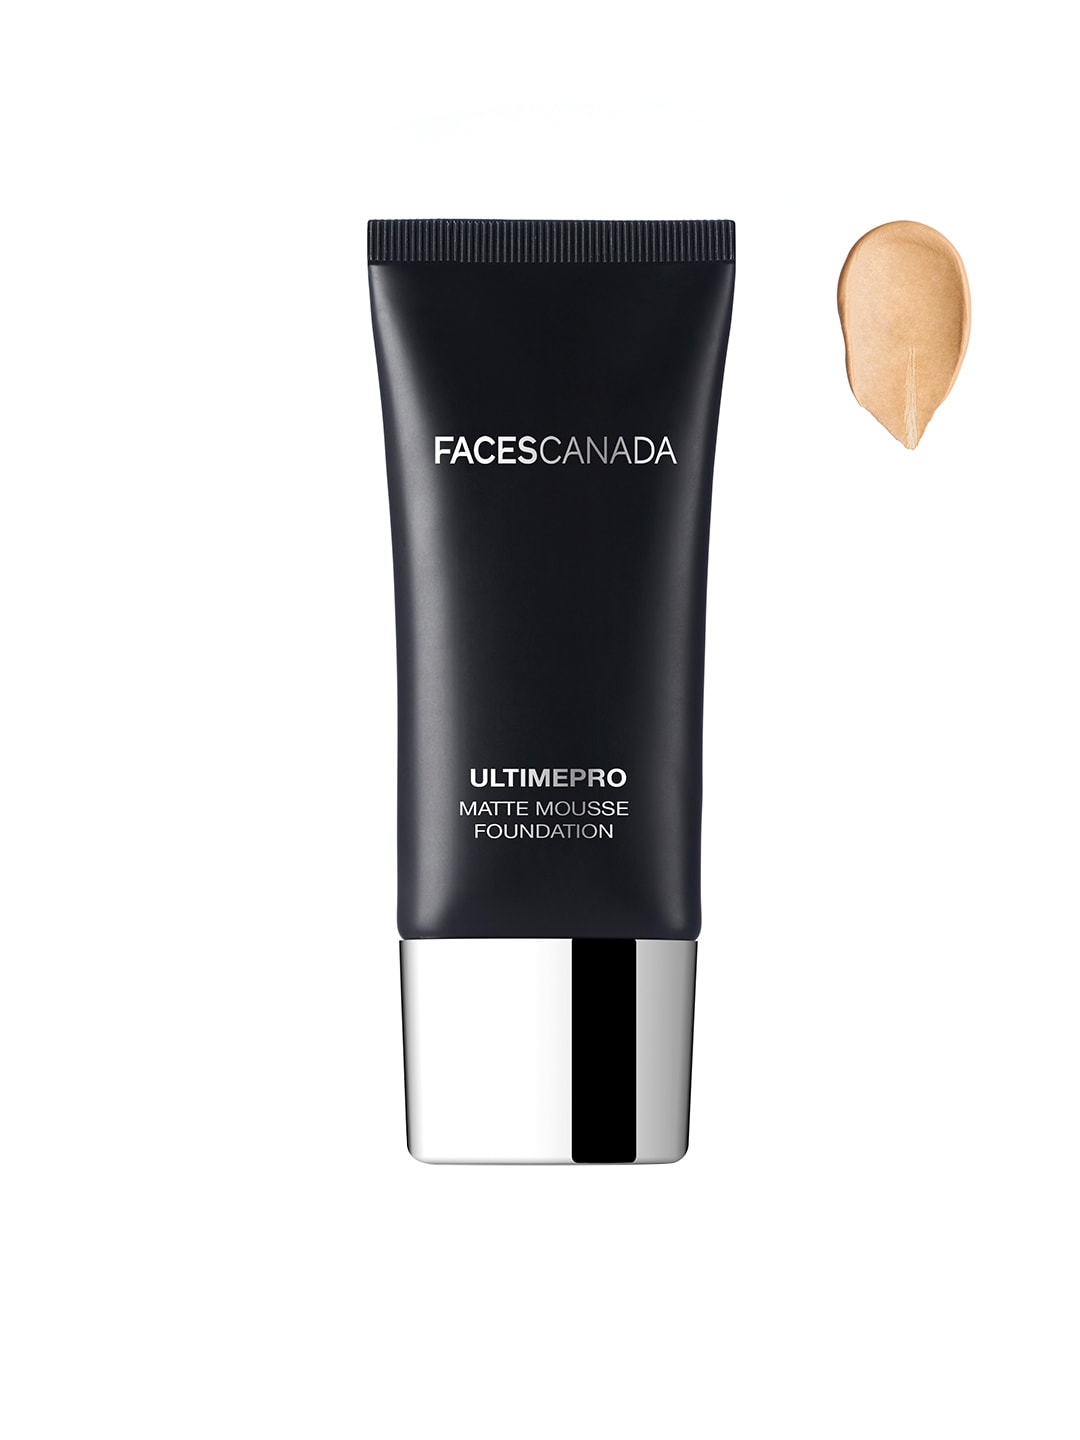 FACES CANADA Ultime Pro Matte Mousse Foundation  Sand 04 30g Price in India